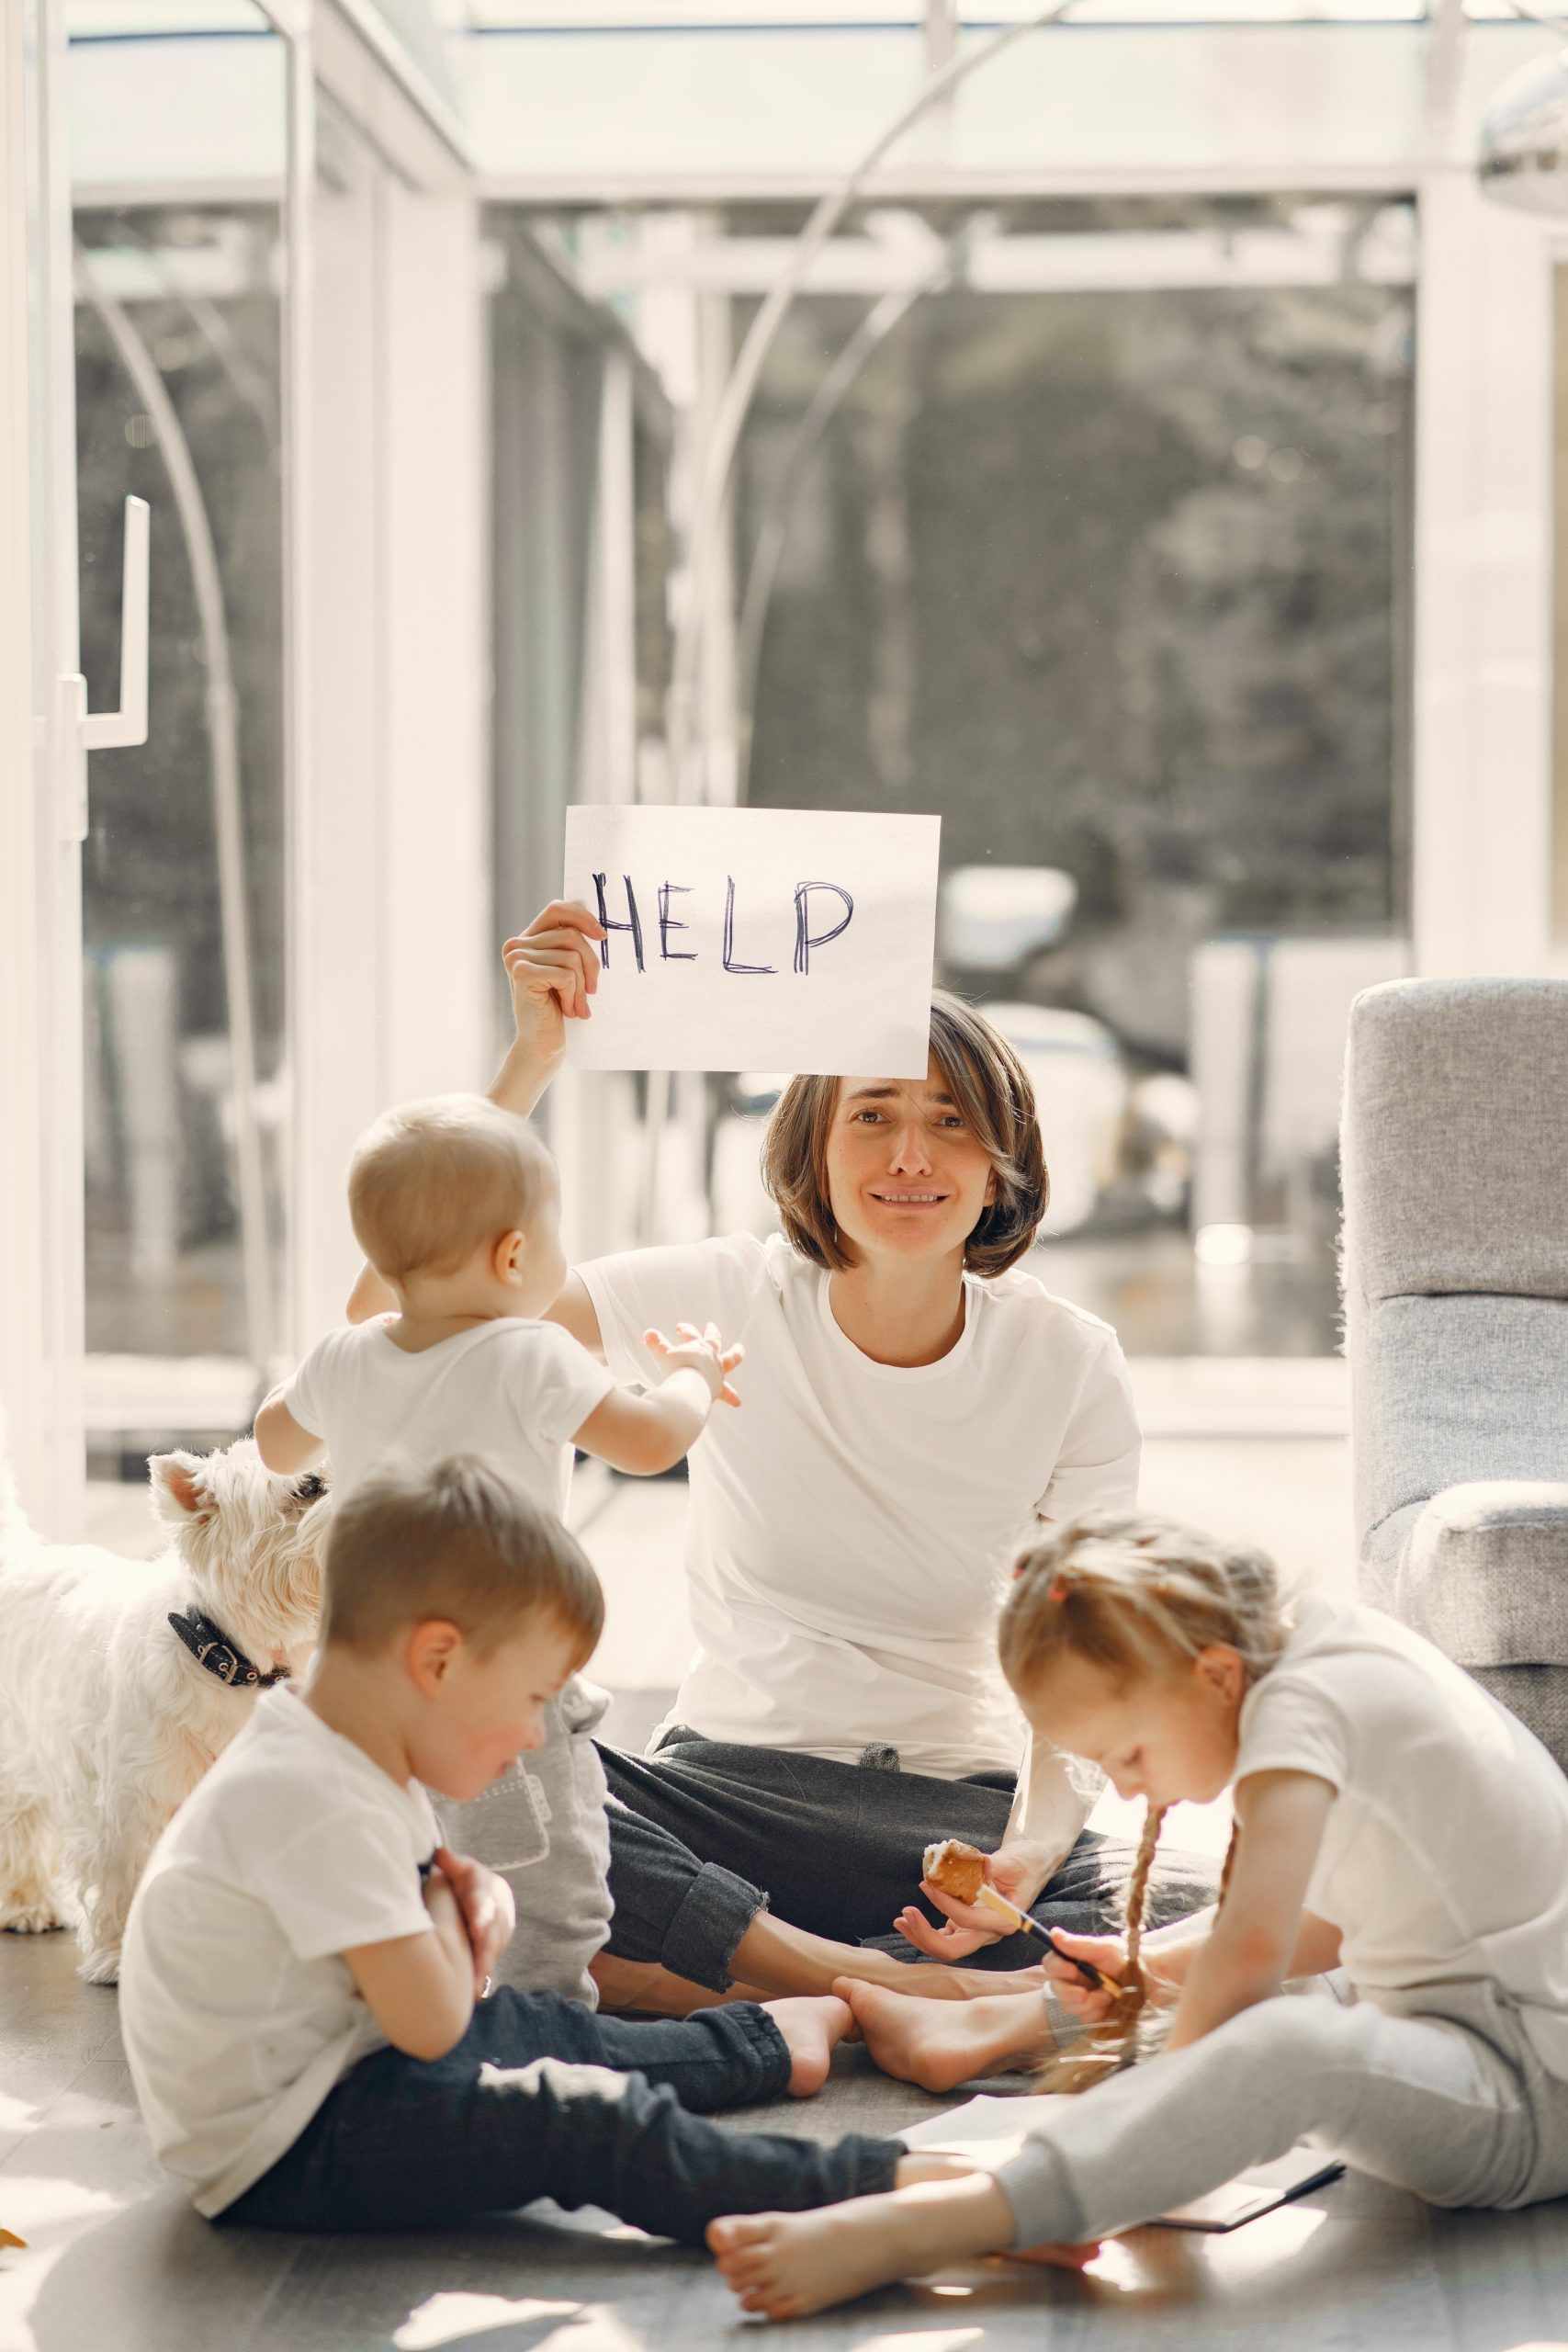 tired-mother-asking-for-help-while-sitting-with-children-4017419